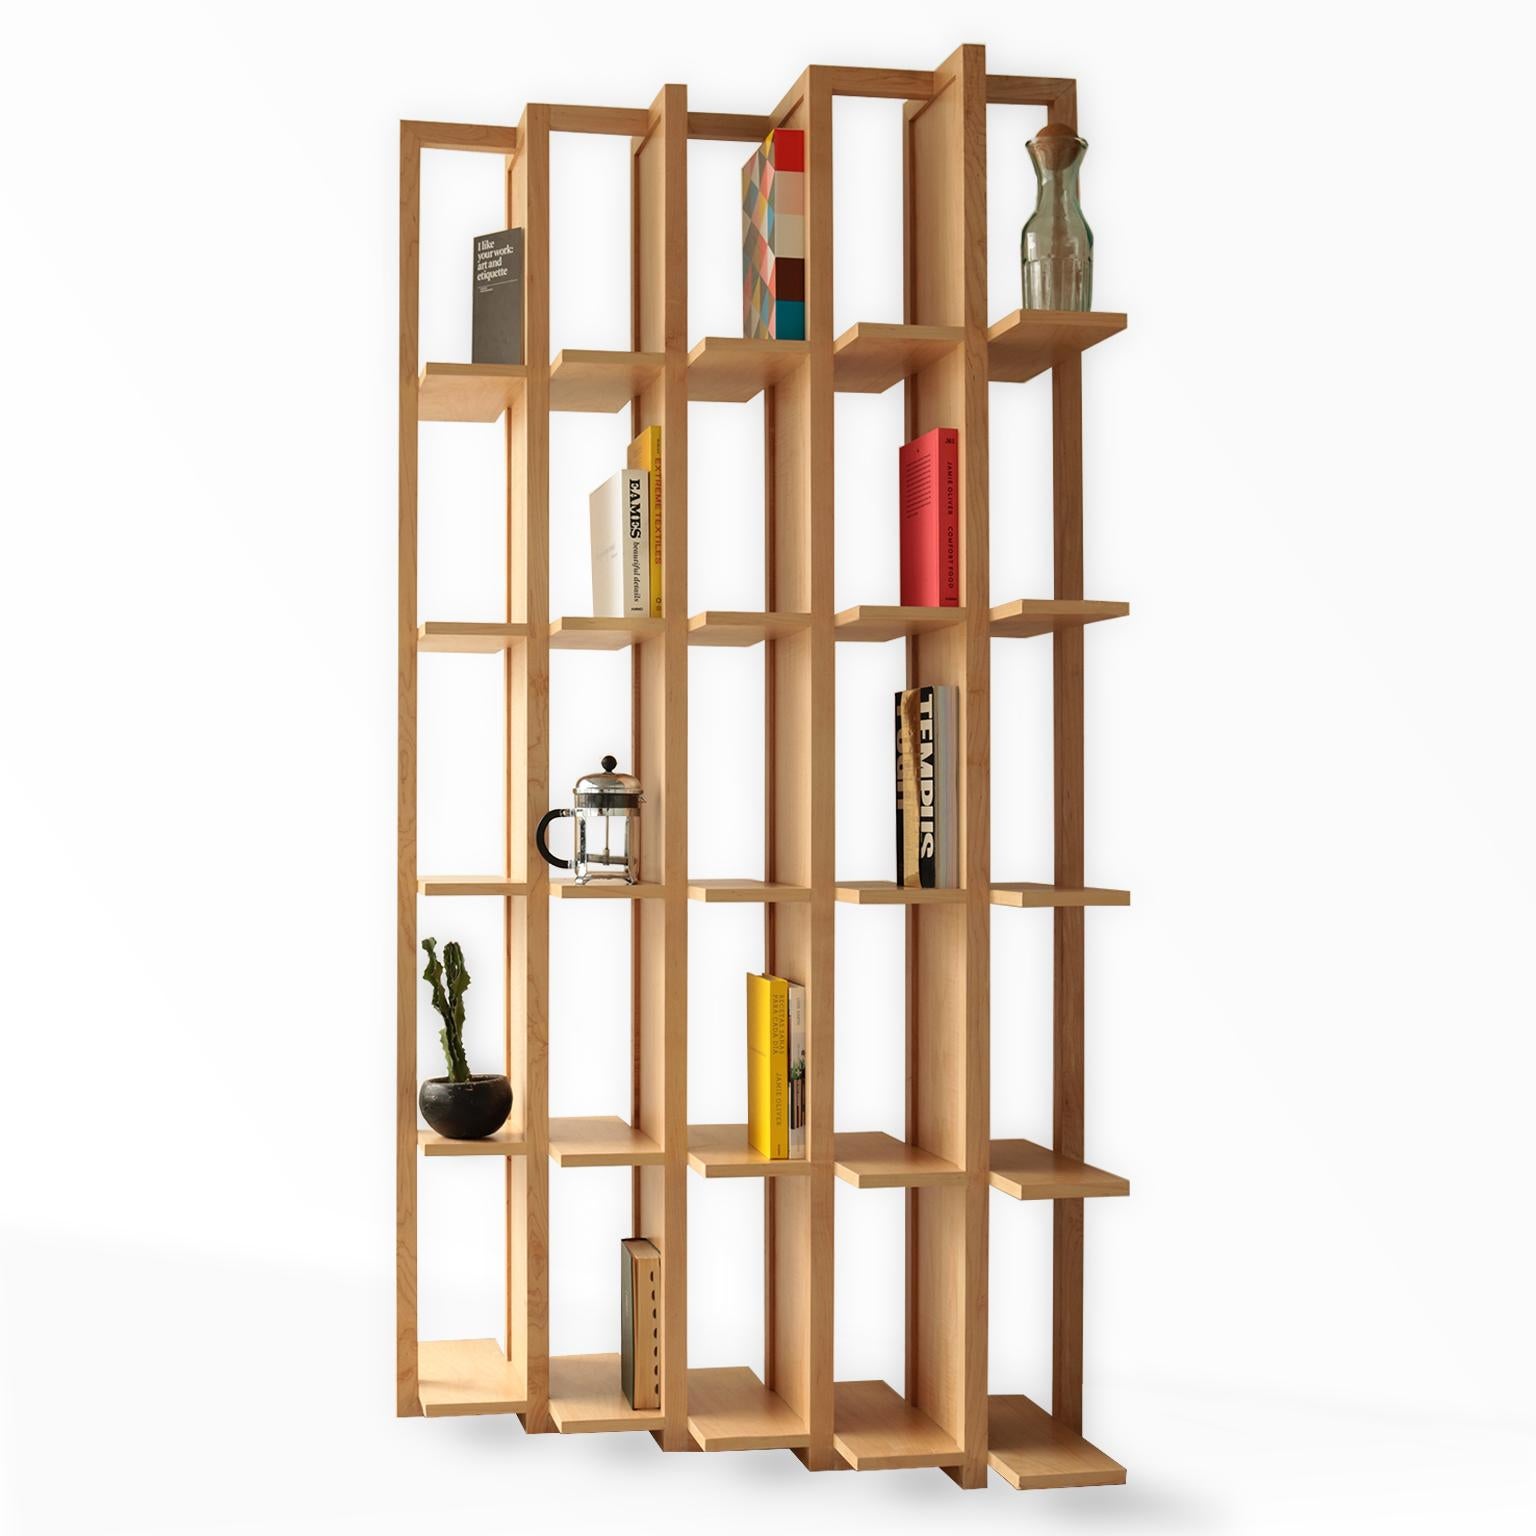 Transversal is a bookcase and space divider, created in solid wood and natural veneer boards. It is the result of the collaboration between FOAM design studio and BREUER carpenters, a Mexican company with years of experience in the manufacture of